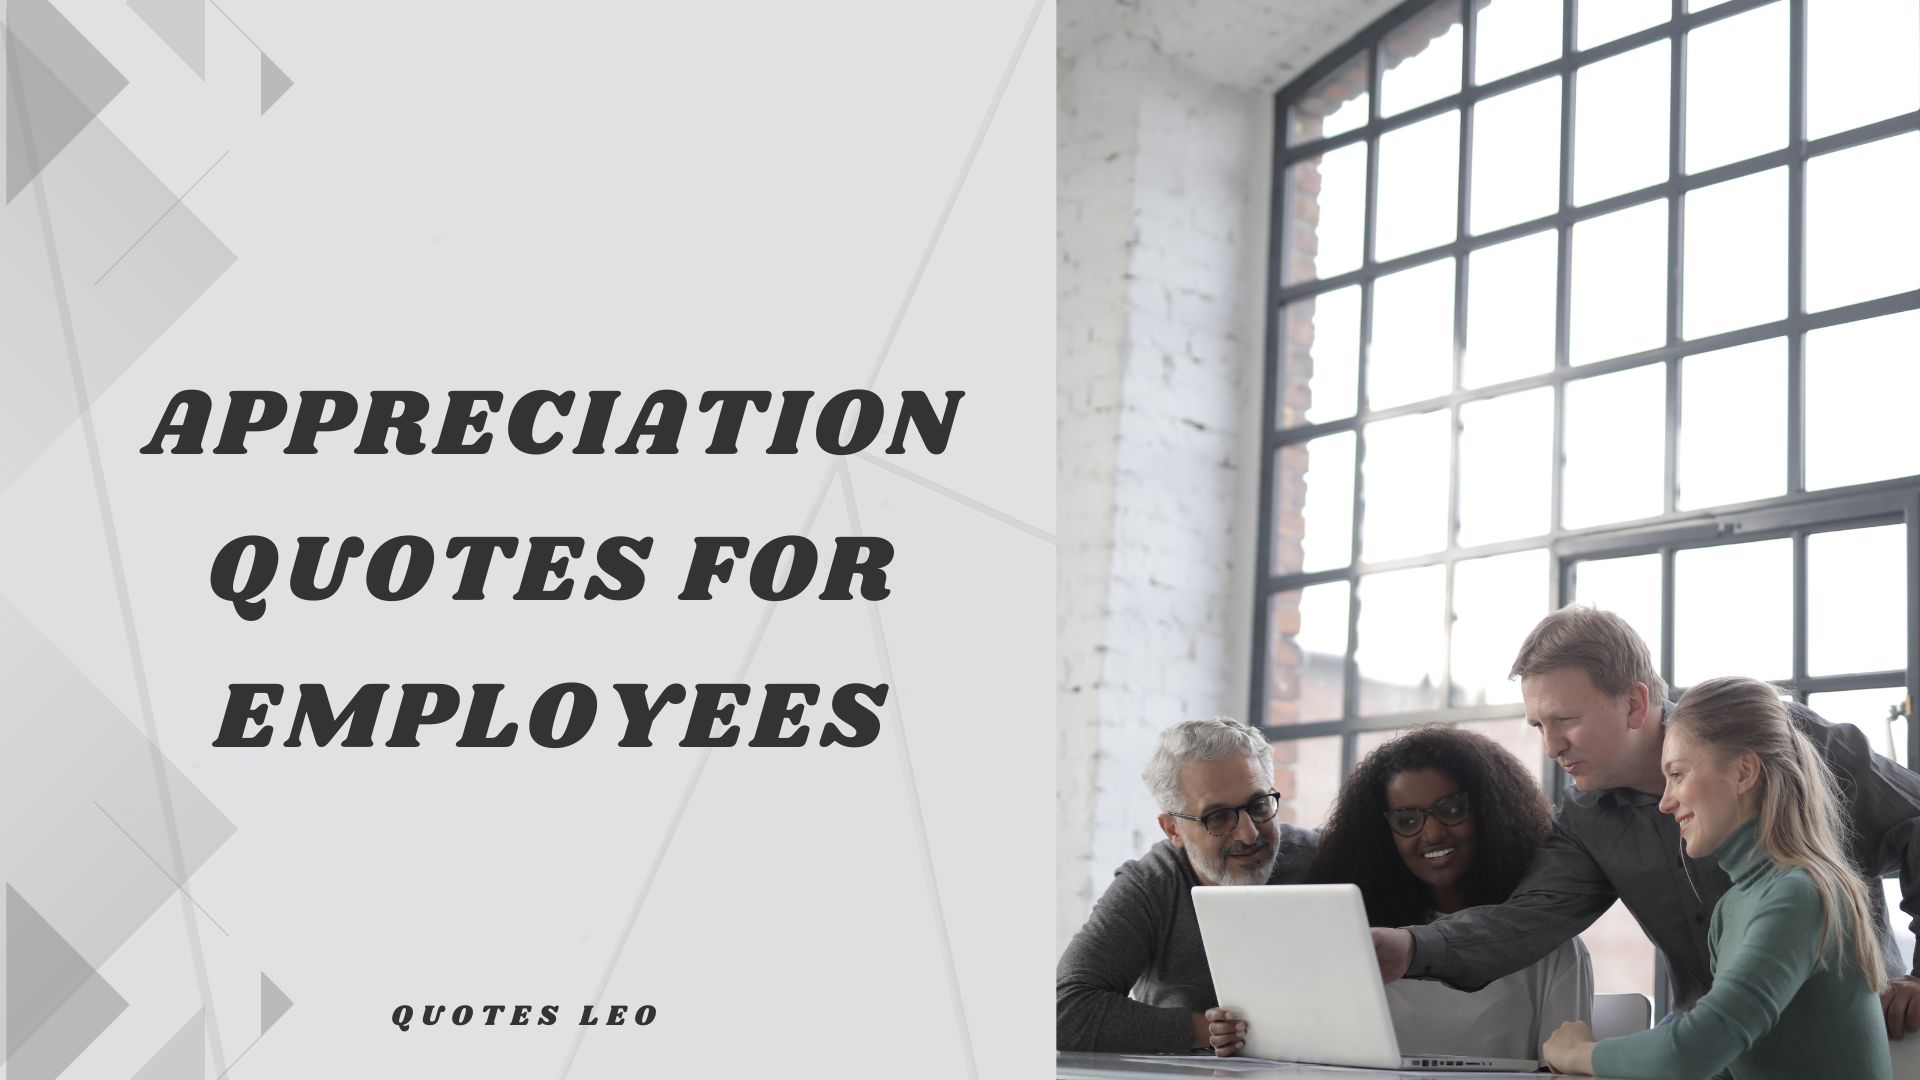 15 Inspirational Appreciation Quotes for employees - Quotes Leo